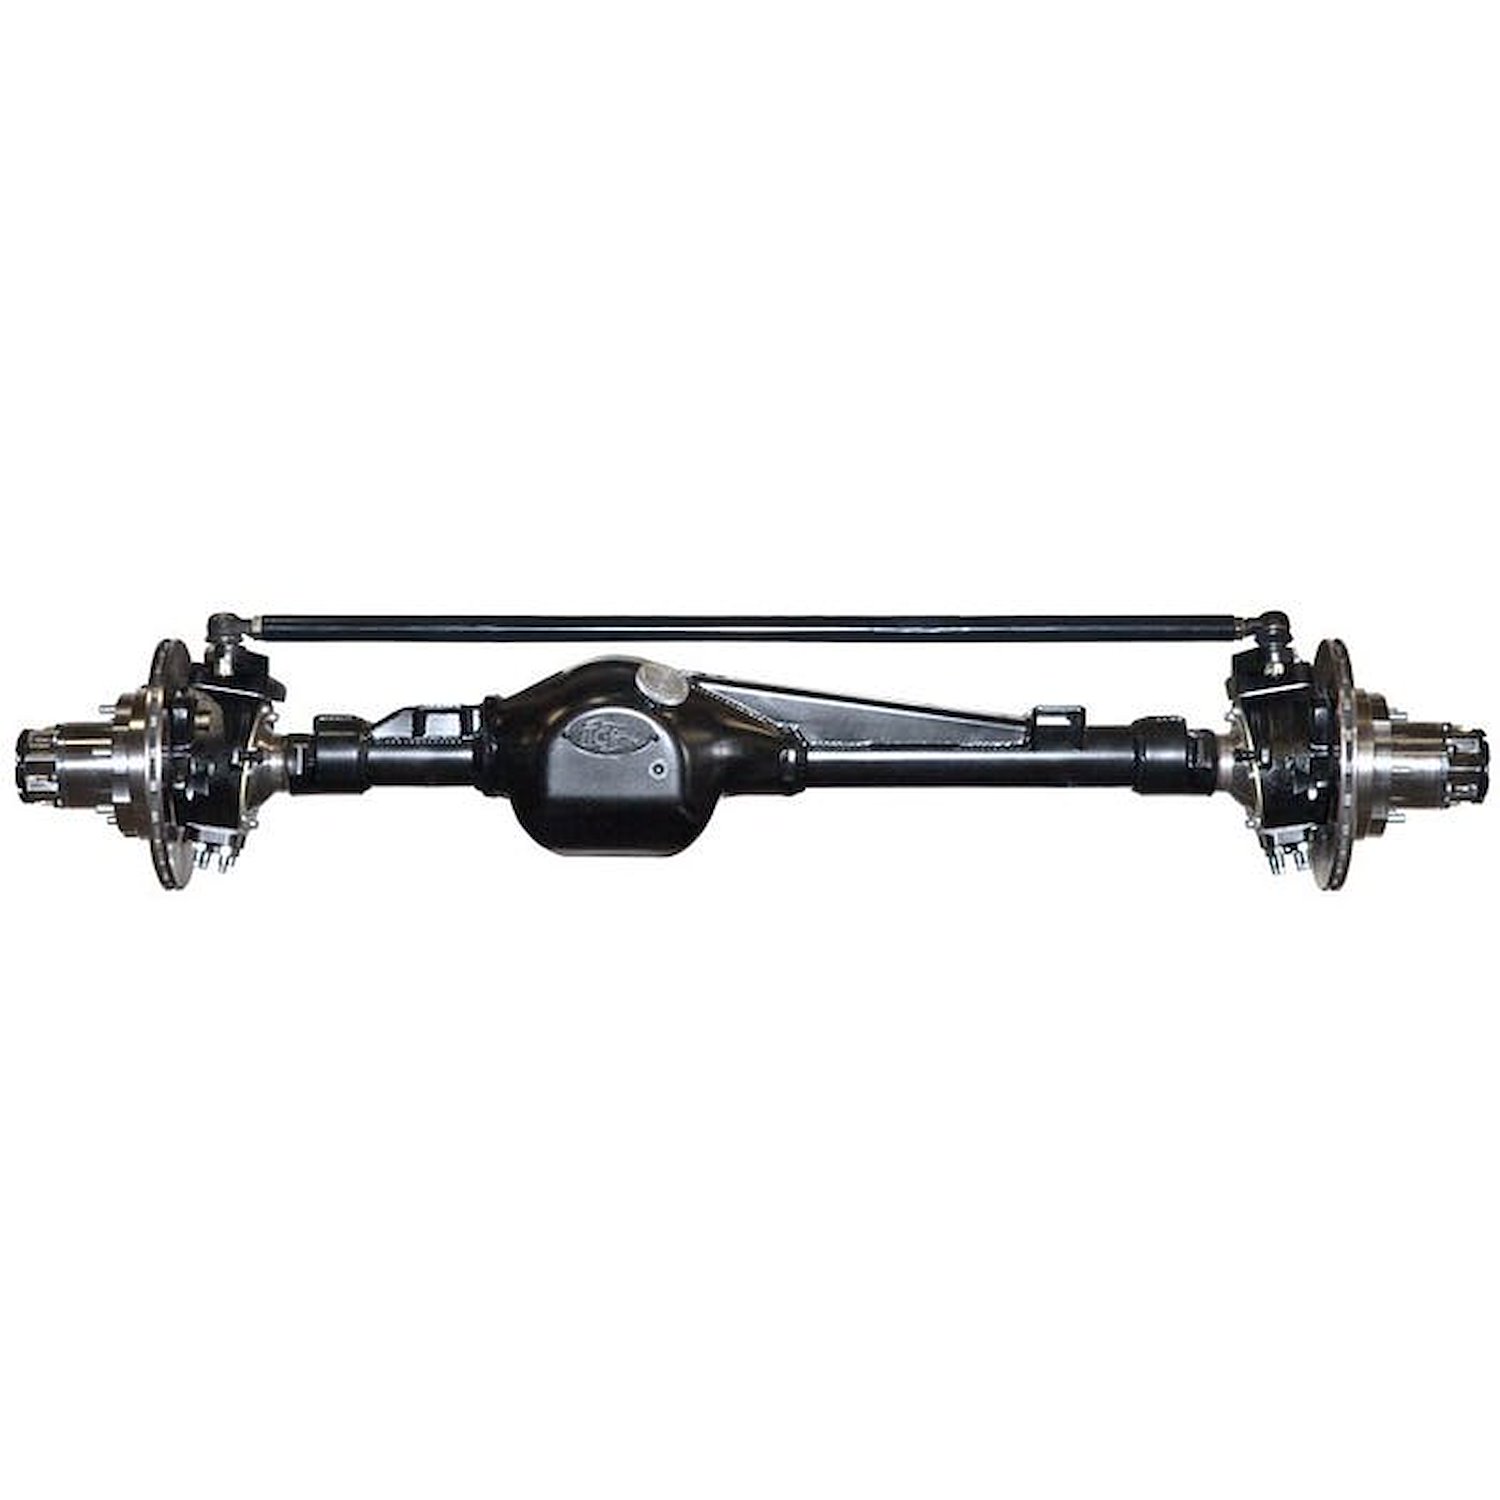 301607-1-KIT Rock Assault Fully-Built Front Axles, +3 Width, LHD, High-Pinion, 4.88, Grizzly, Locking Hubs, Toyota